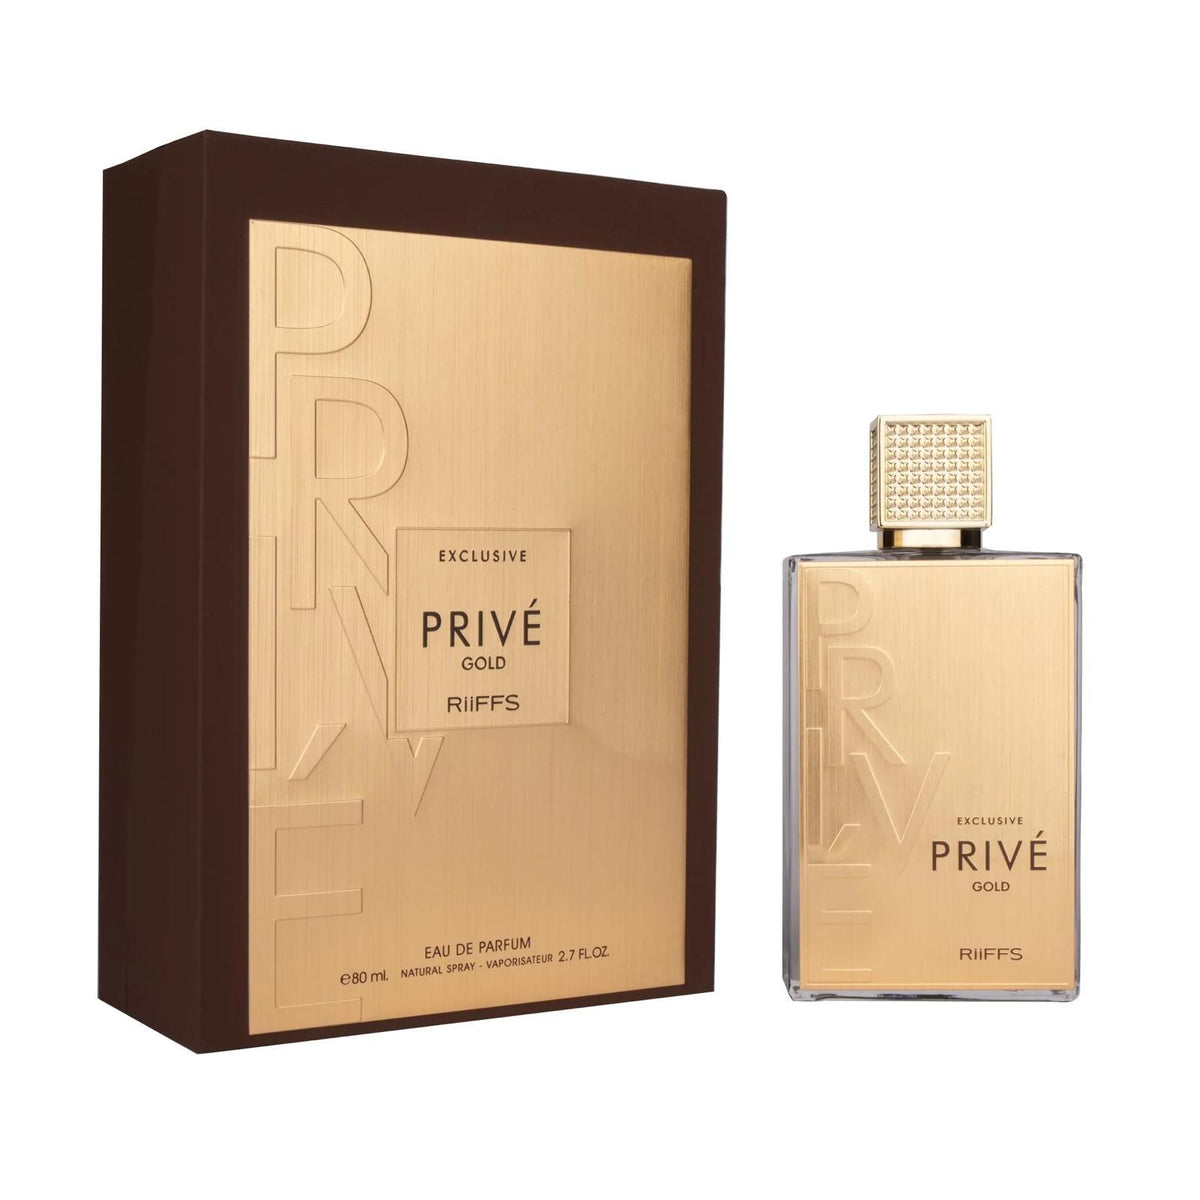 EXCLUSIVE PRIVE GOLD UNISEX EDP BY RIIFFS